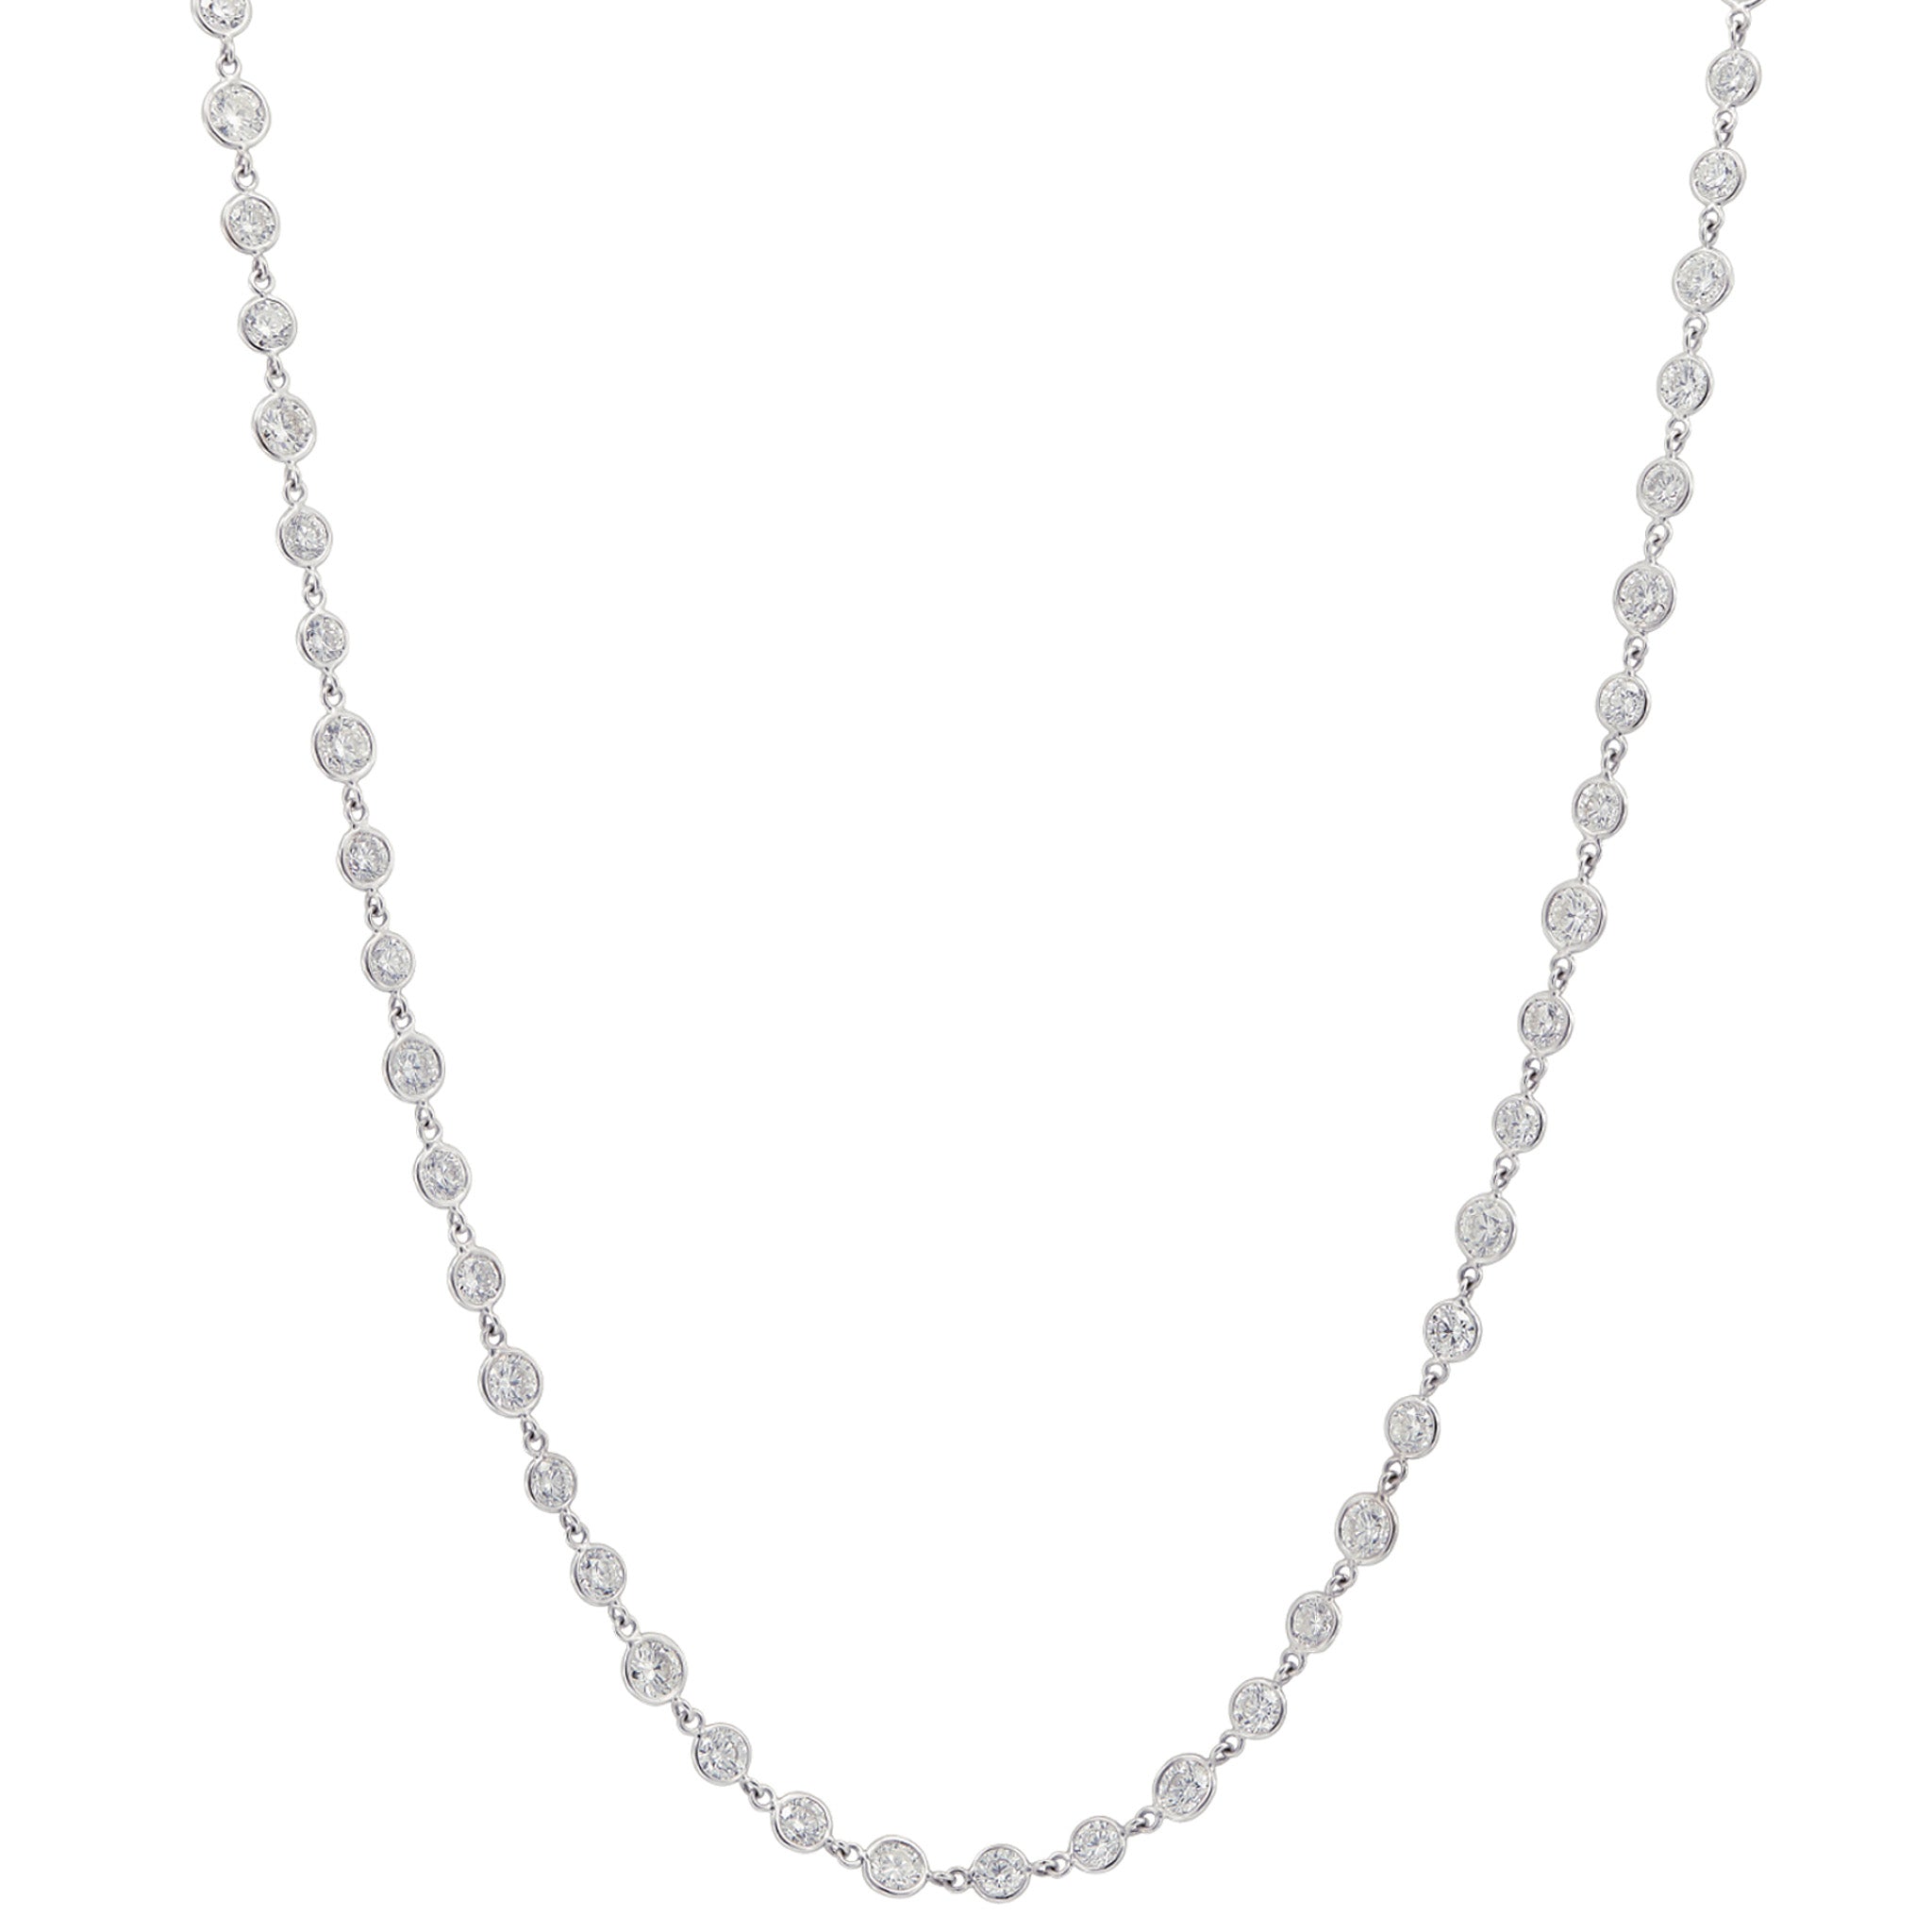 Long Diamond Chain Available in Varying Lengths and Prices